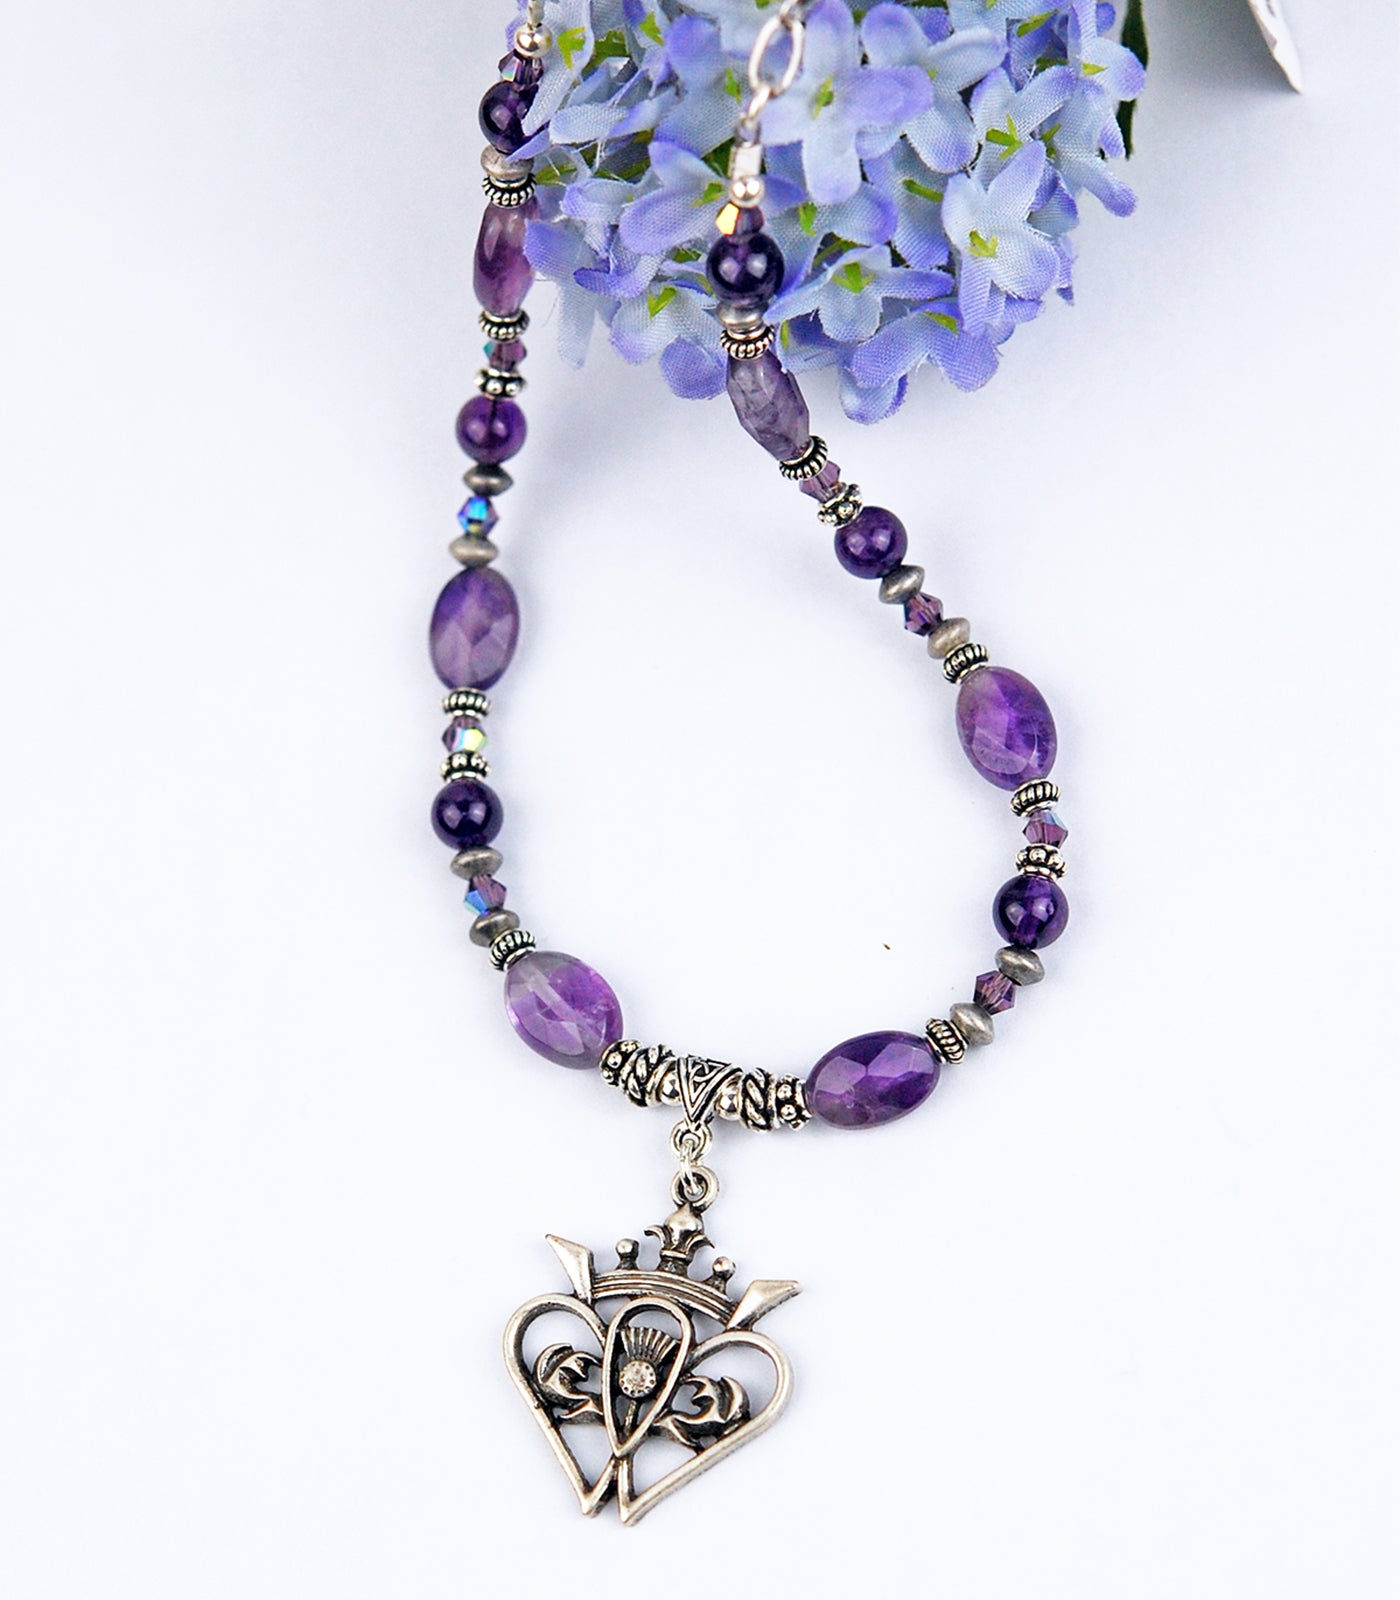 Luckenbooth and Amethyst Scottish Necklace